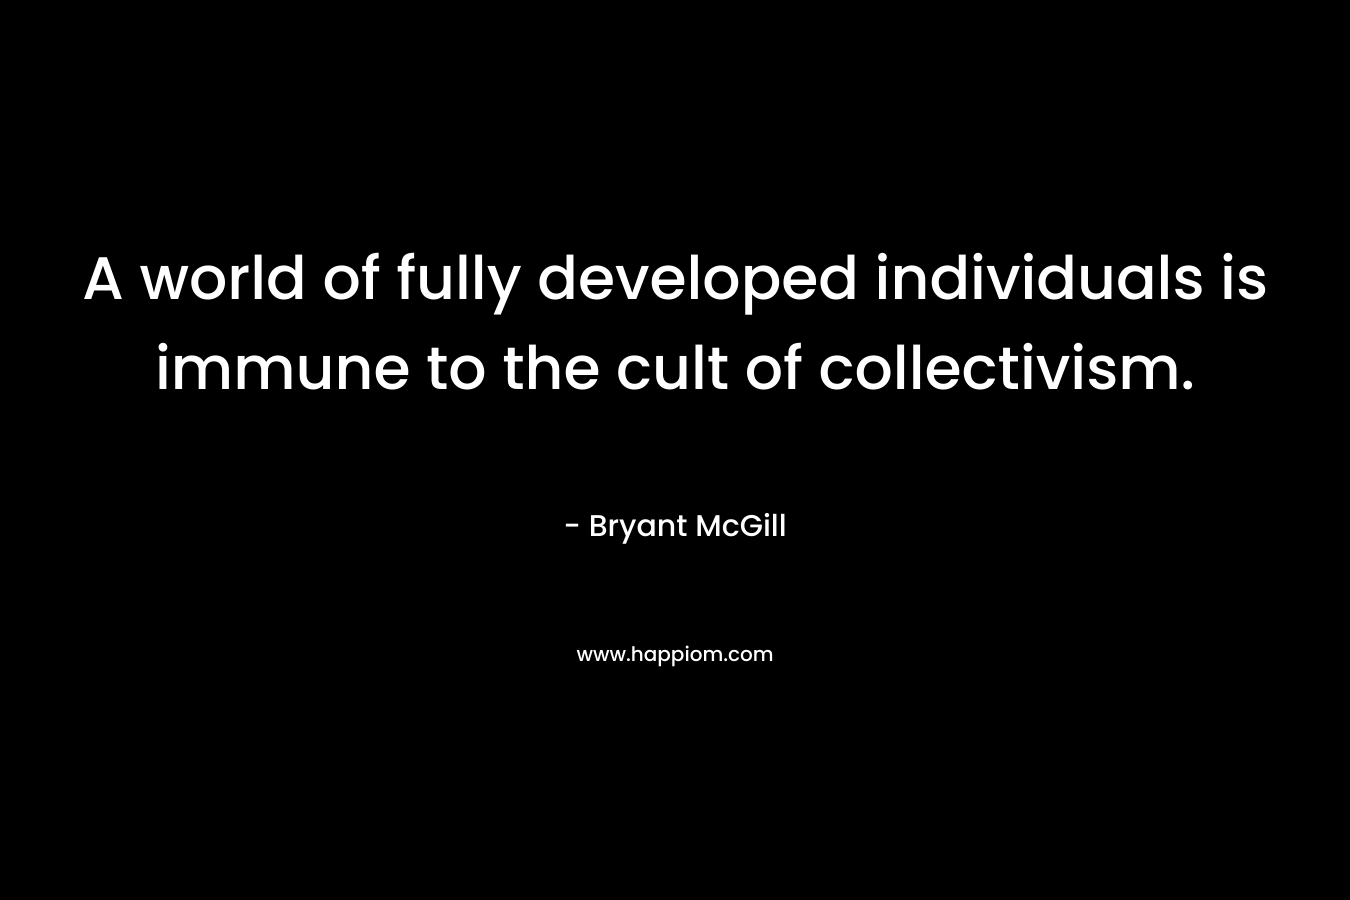 A world of fully developed individuals is immune to the cult of collectivism. – Bryant McGill